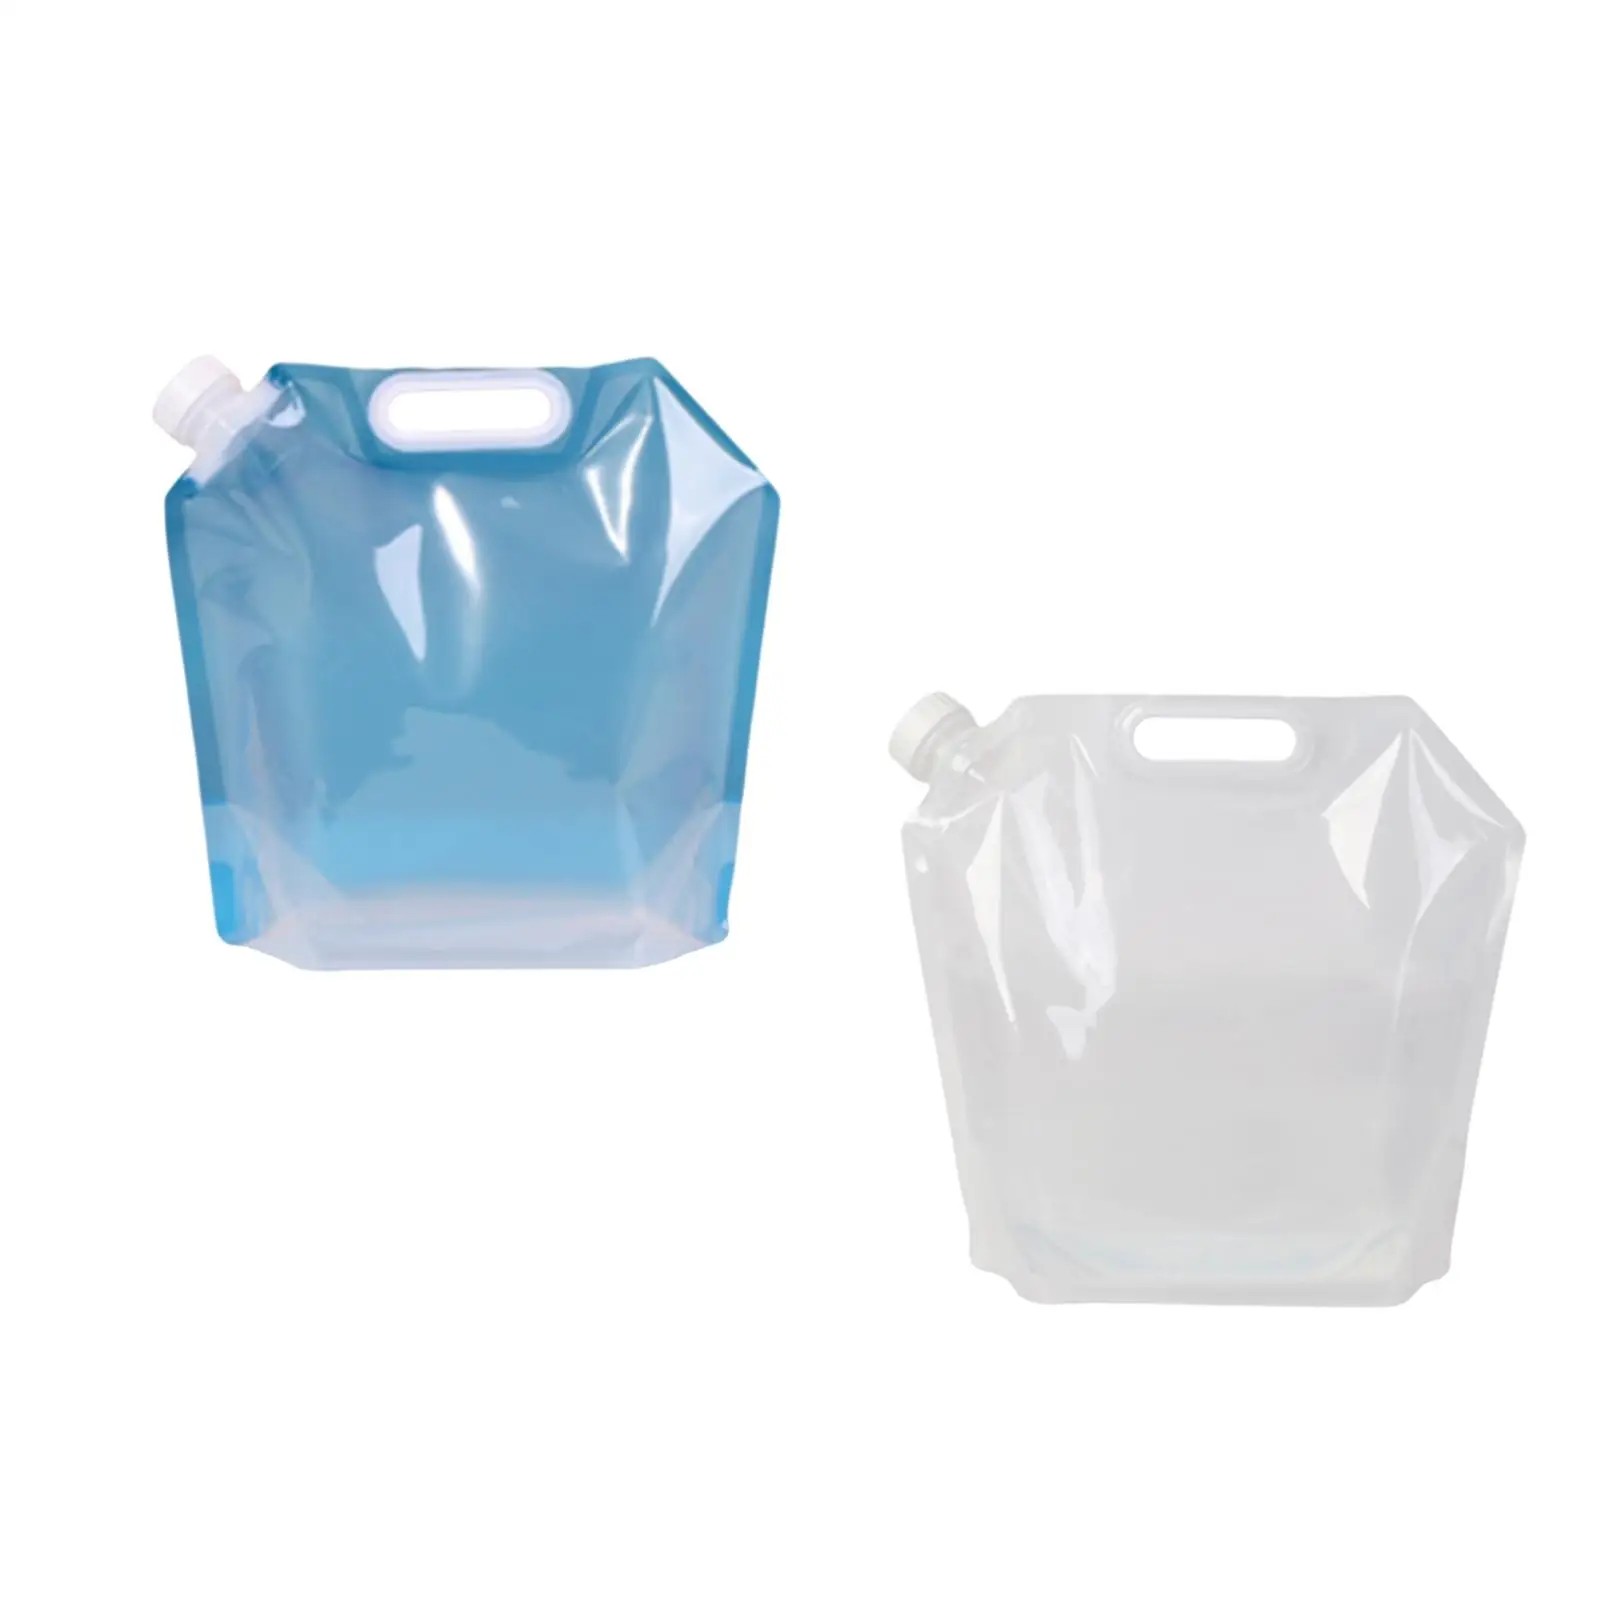 Foldable Water Tank Container Bag 5L Emergency Water Jug Wide Bottle Lip Durable for Backpacking Saving Space Reusable 32.5x30cm